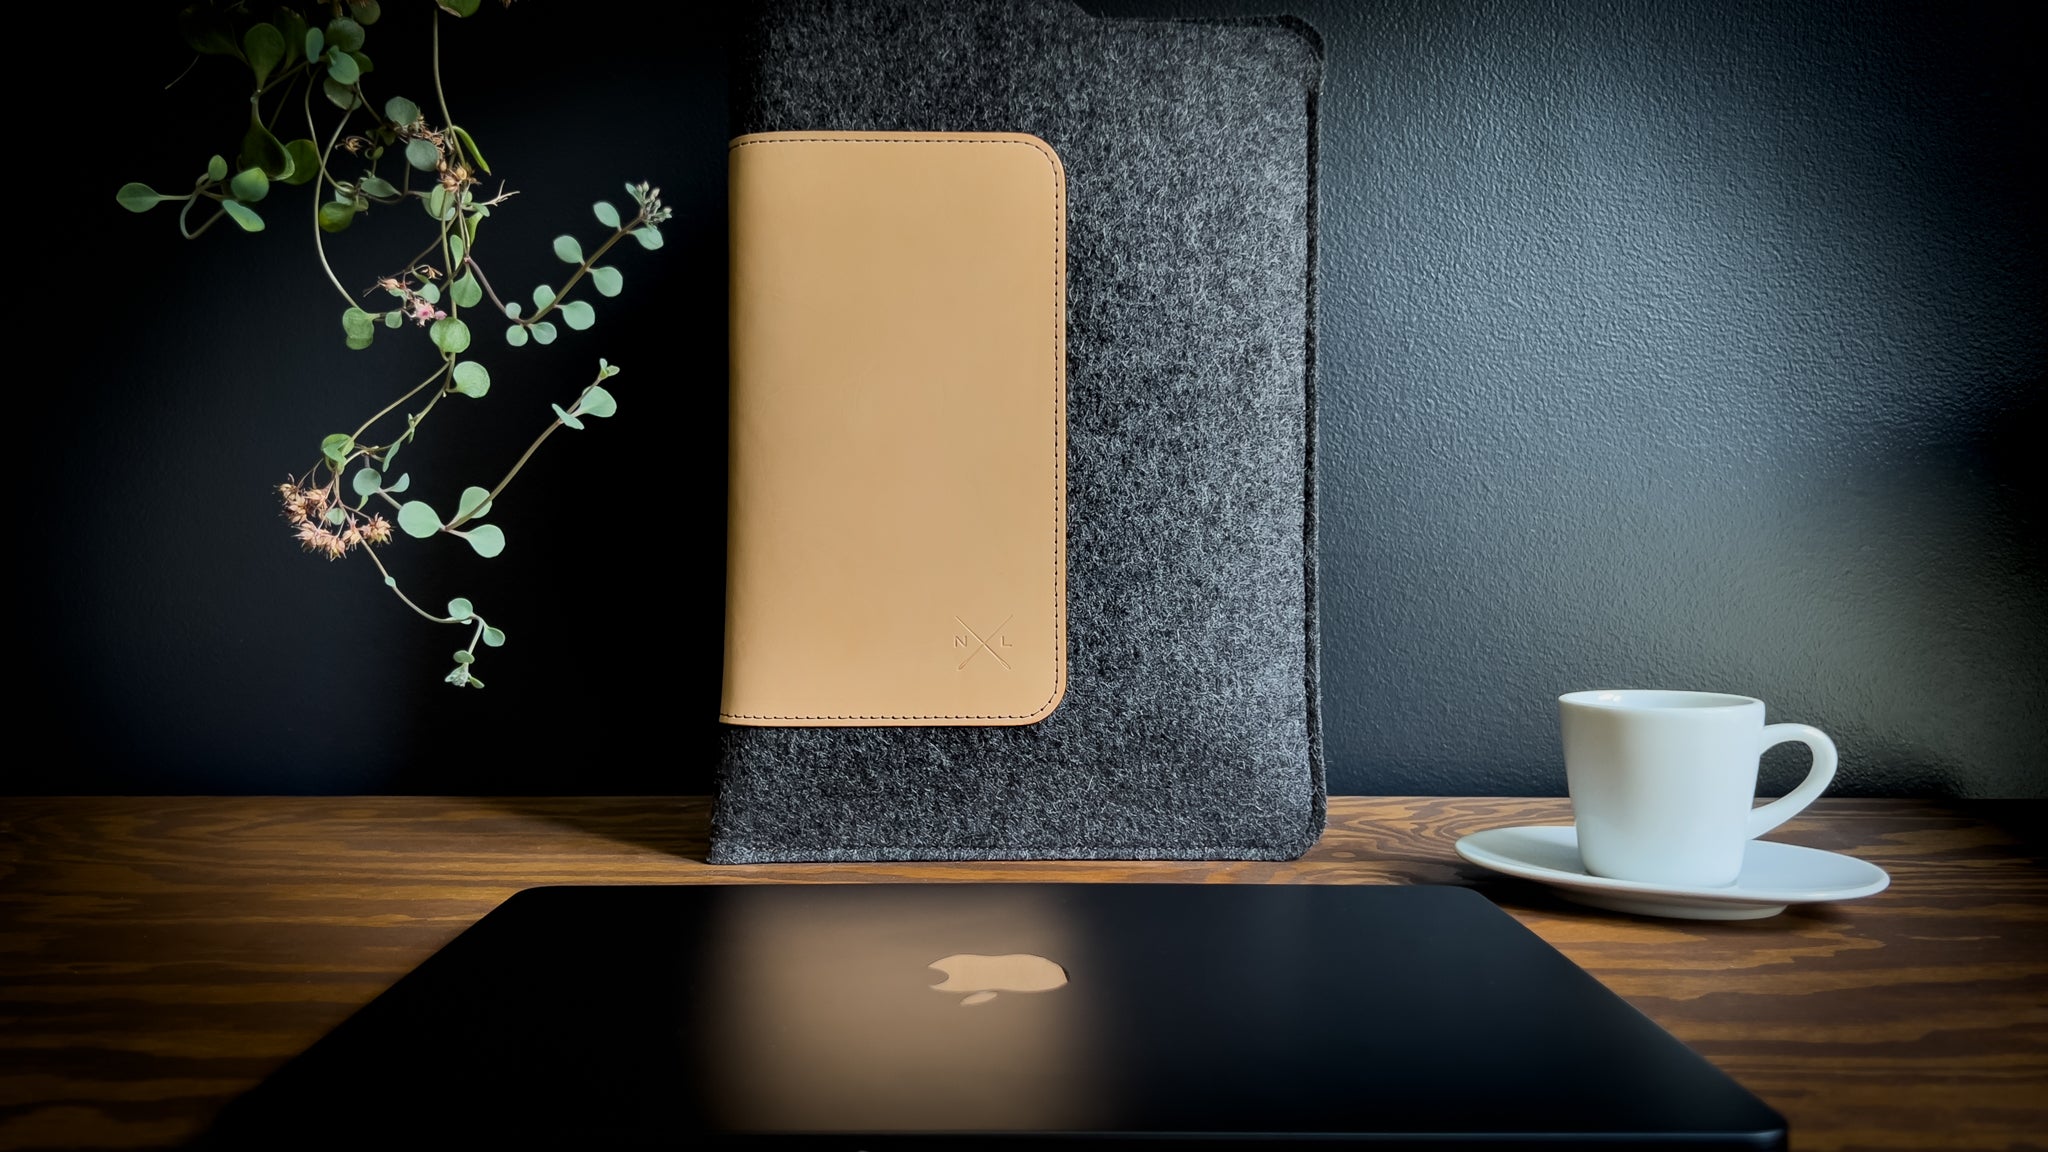 MacBook Air Sleeves handcrafted from Vegetable Tanned Leather and Merino Wool Felt